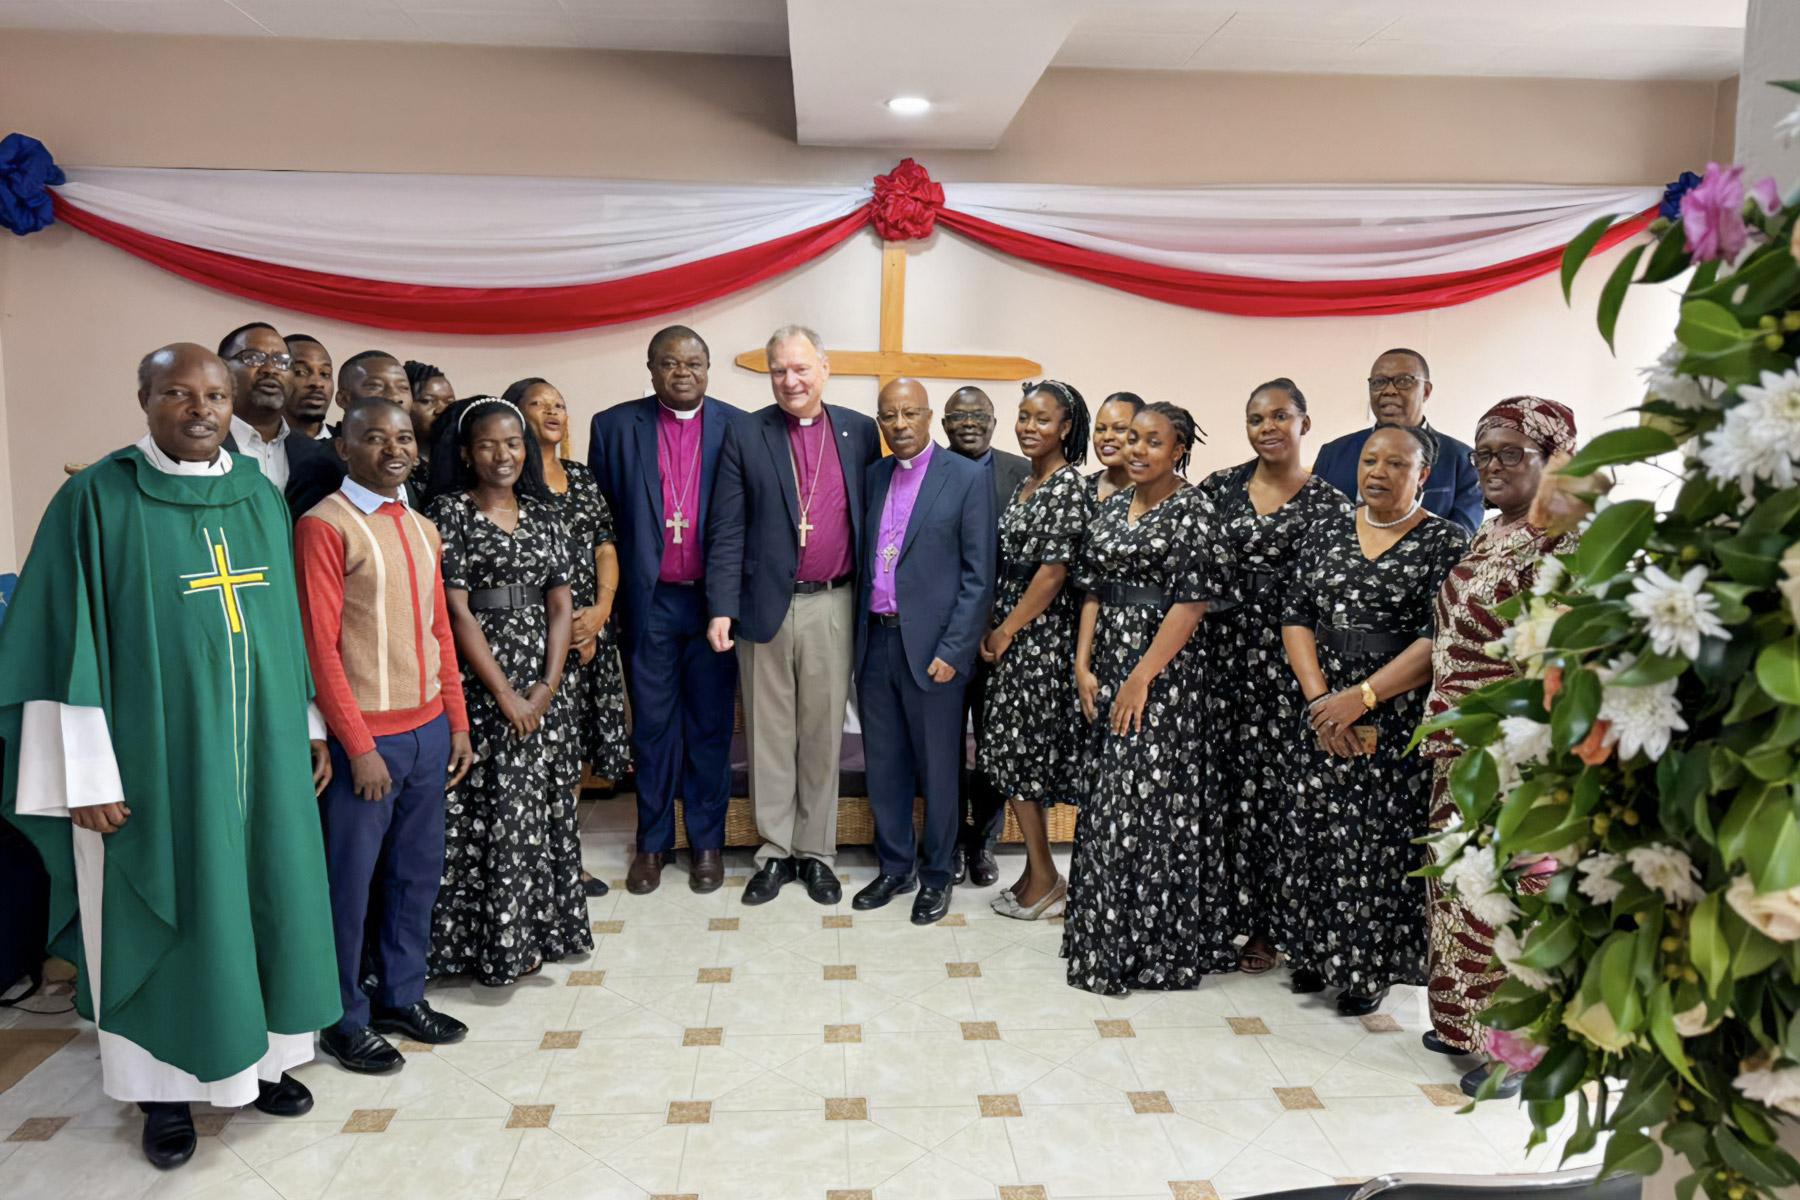 LWF President Henrik Stubkjær and his delegation join ELCT leaders and head office staff for morning worship as their visit begins. Photo: LWF/A. Danielsson